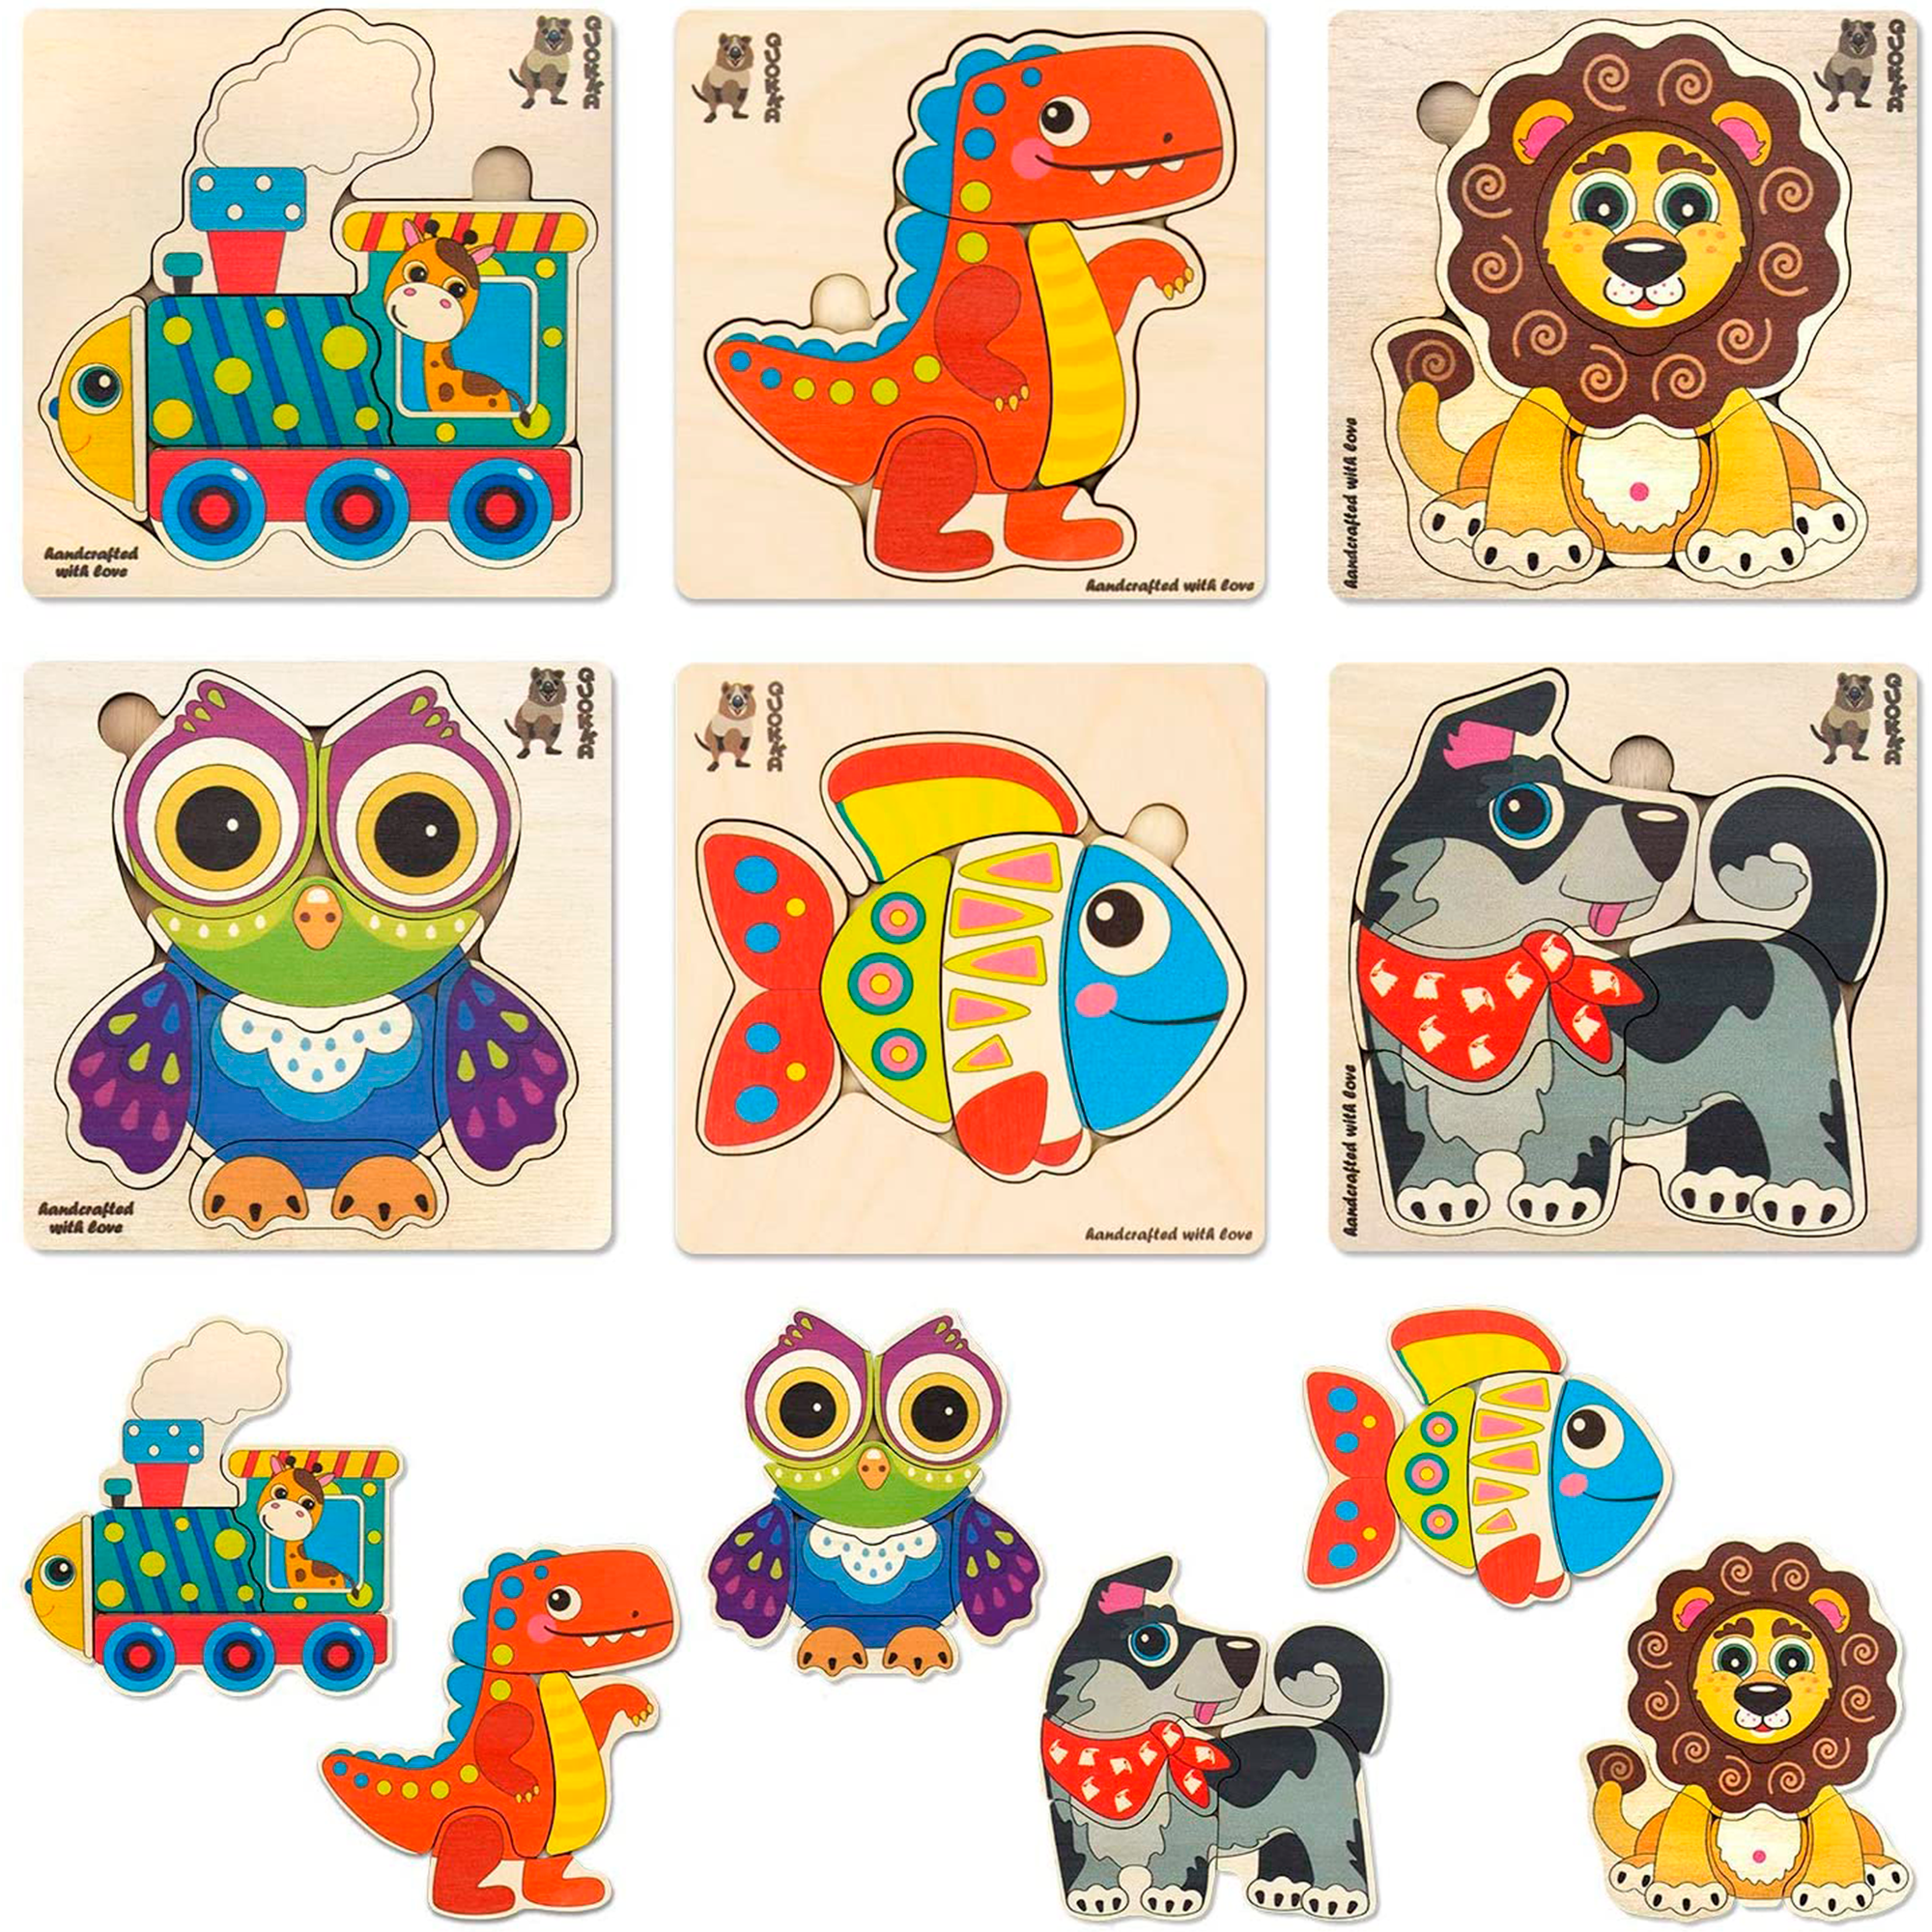 Fun Toddler Present 3 Educational Wooden Puzzles for 1-2 Year Olds for Learning Proffessions Colors Vehicles with Words and Colorful Images Toddler Toys for 1 2 3 Year Old Boys and Girls 